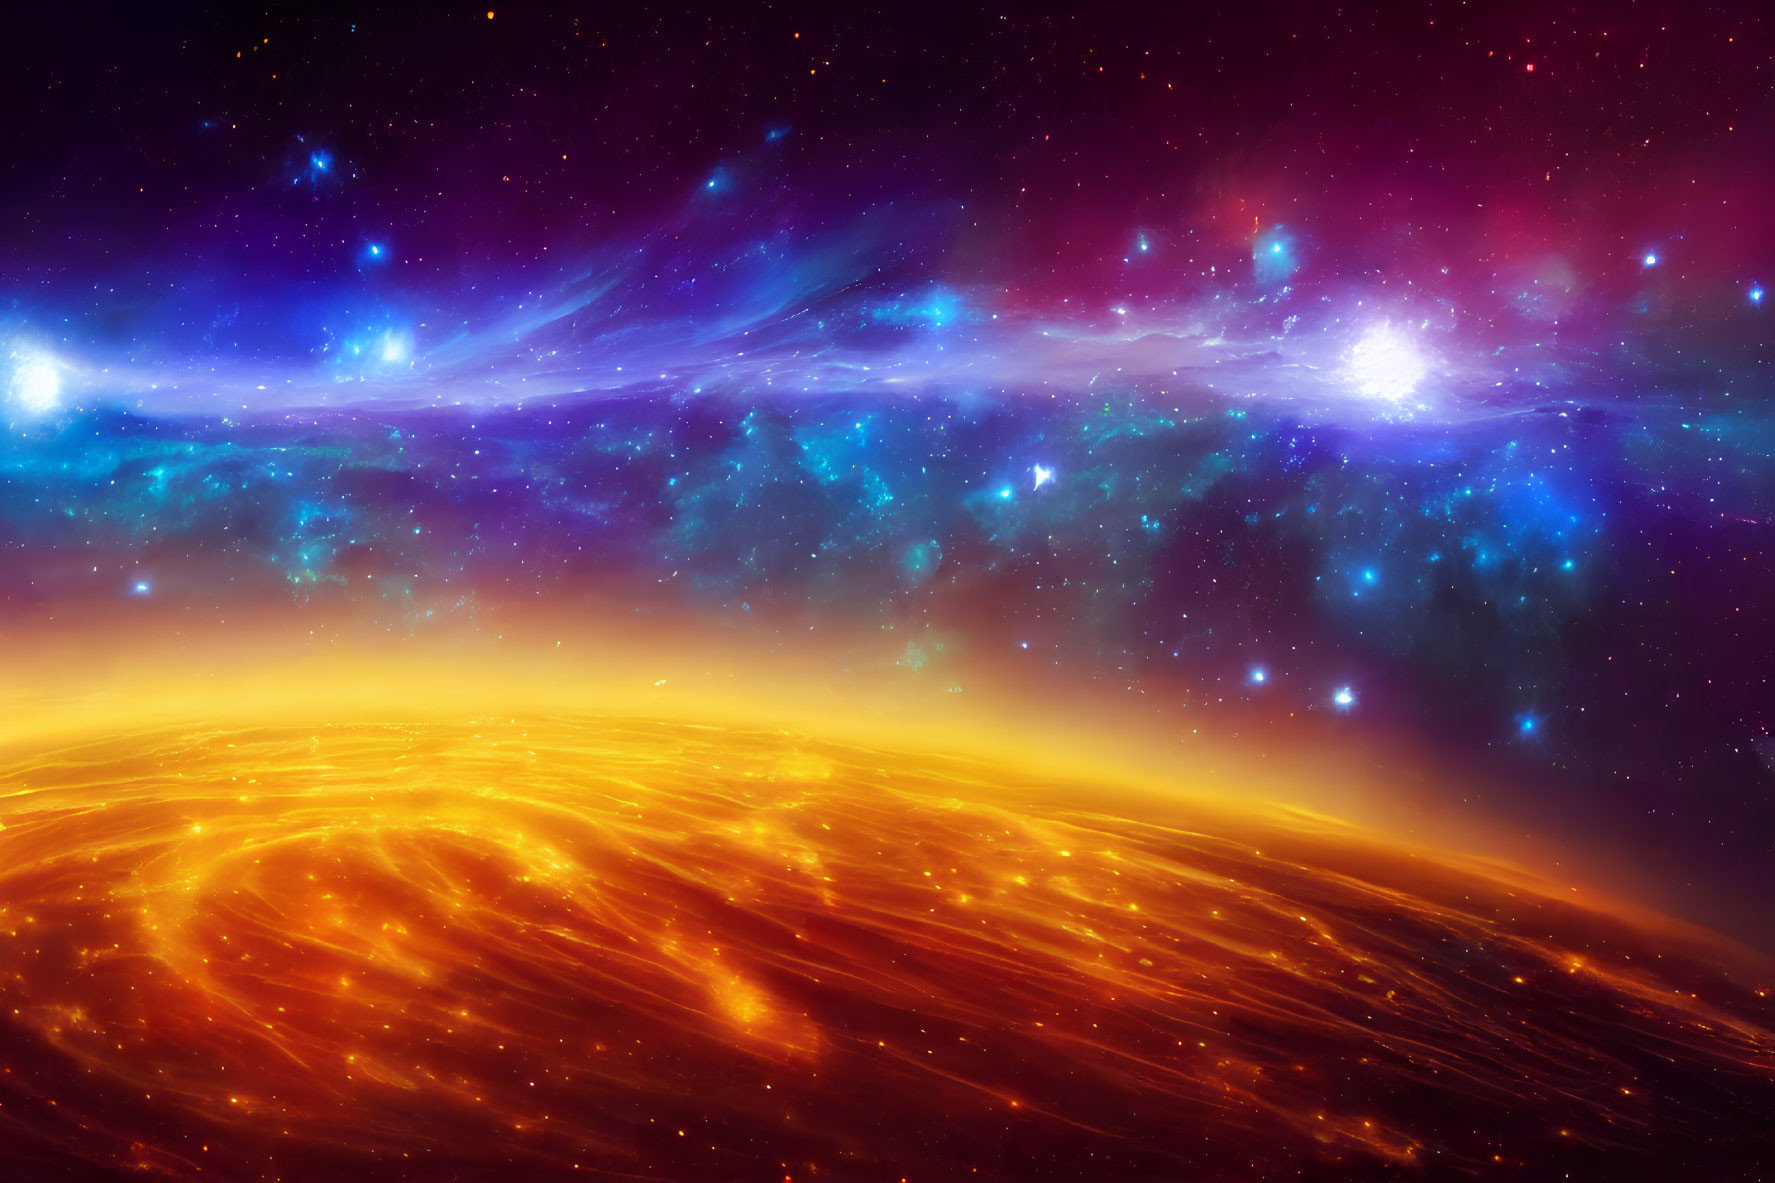 Fiery orange foreground blending into starry nebula with blue, purple, and red hues